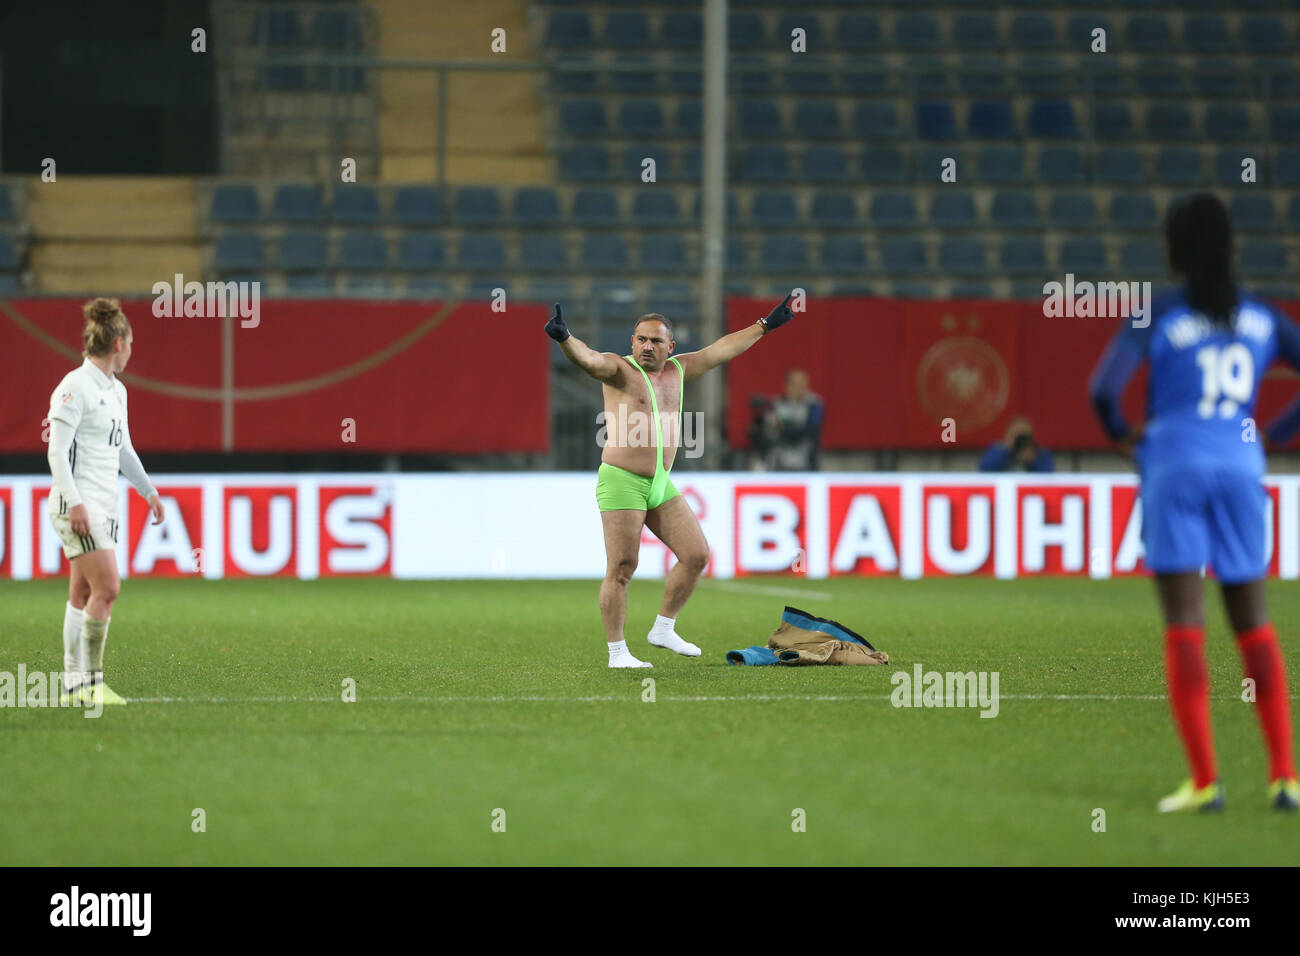 A streaker runs onto the field during the women's international friendly soccer match between Germany and France in the Schueco Arena stadium in Bielefeld, Germany, 24 November 2017. Photo: Friso Gentsch/dpa Stock Photo